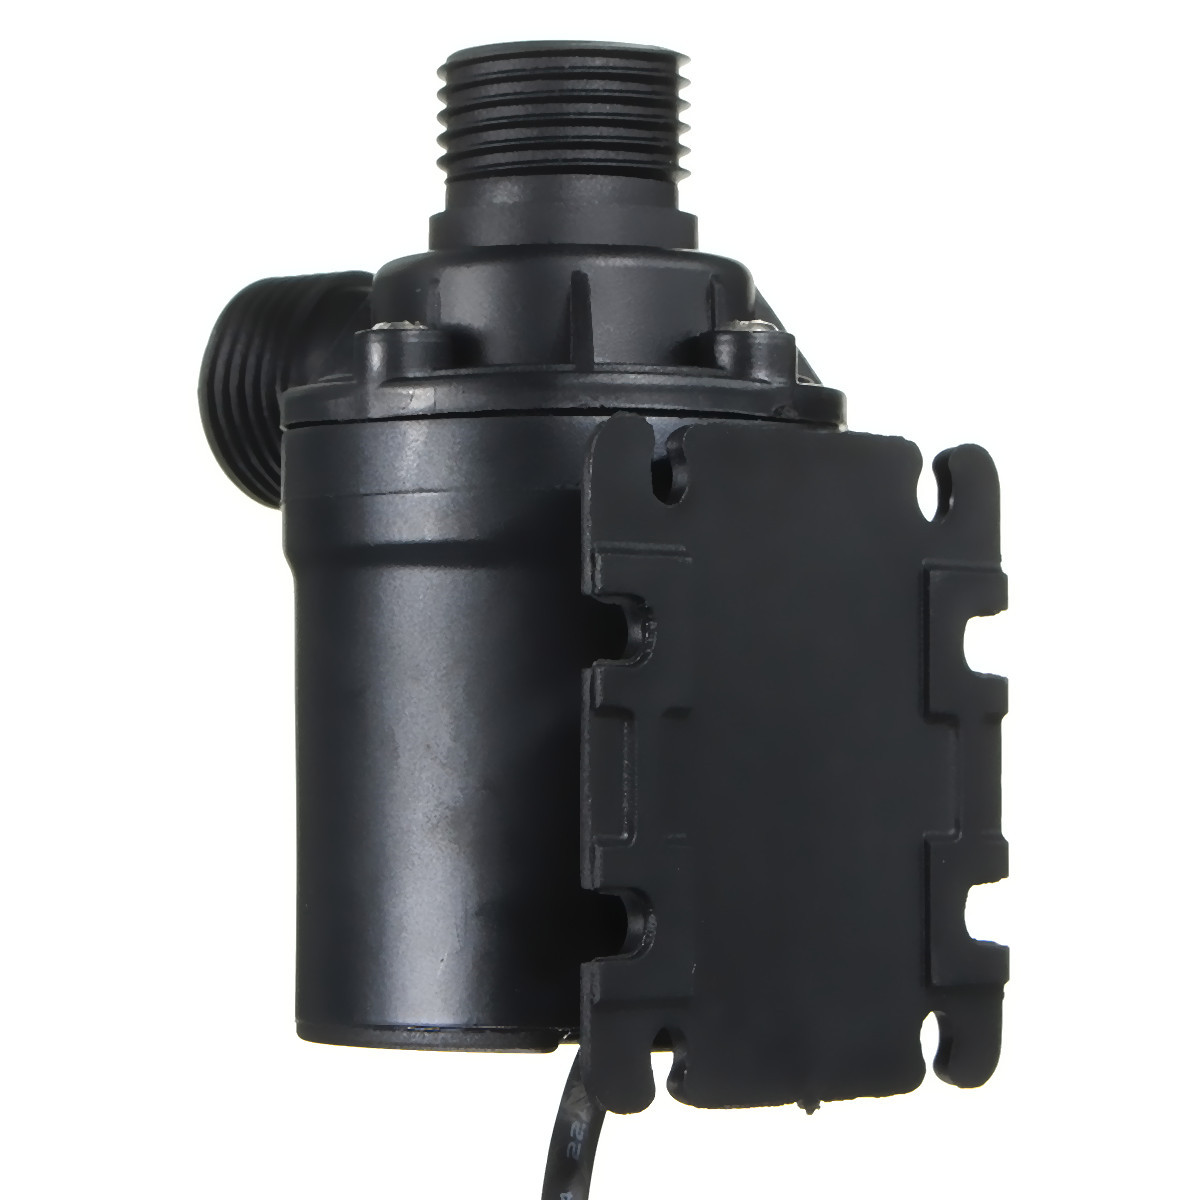 DC-24V-800LH-19W-5m-Lift-Mini-Quiet-Brushless-Motor-Submersible-Water-Pump-With-4mm-Threaded-Port-1100573-7